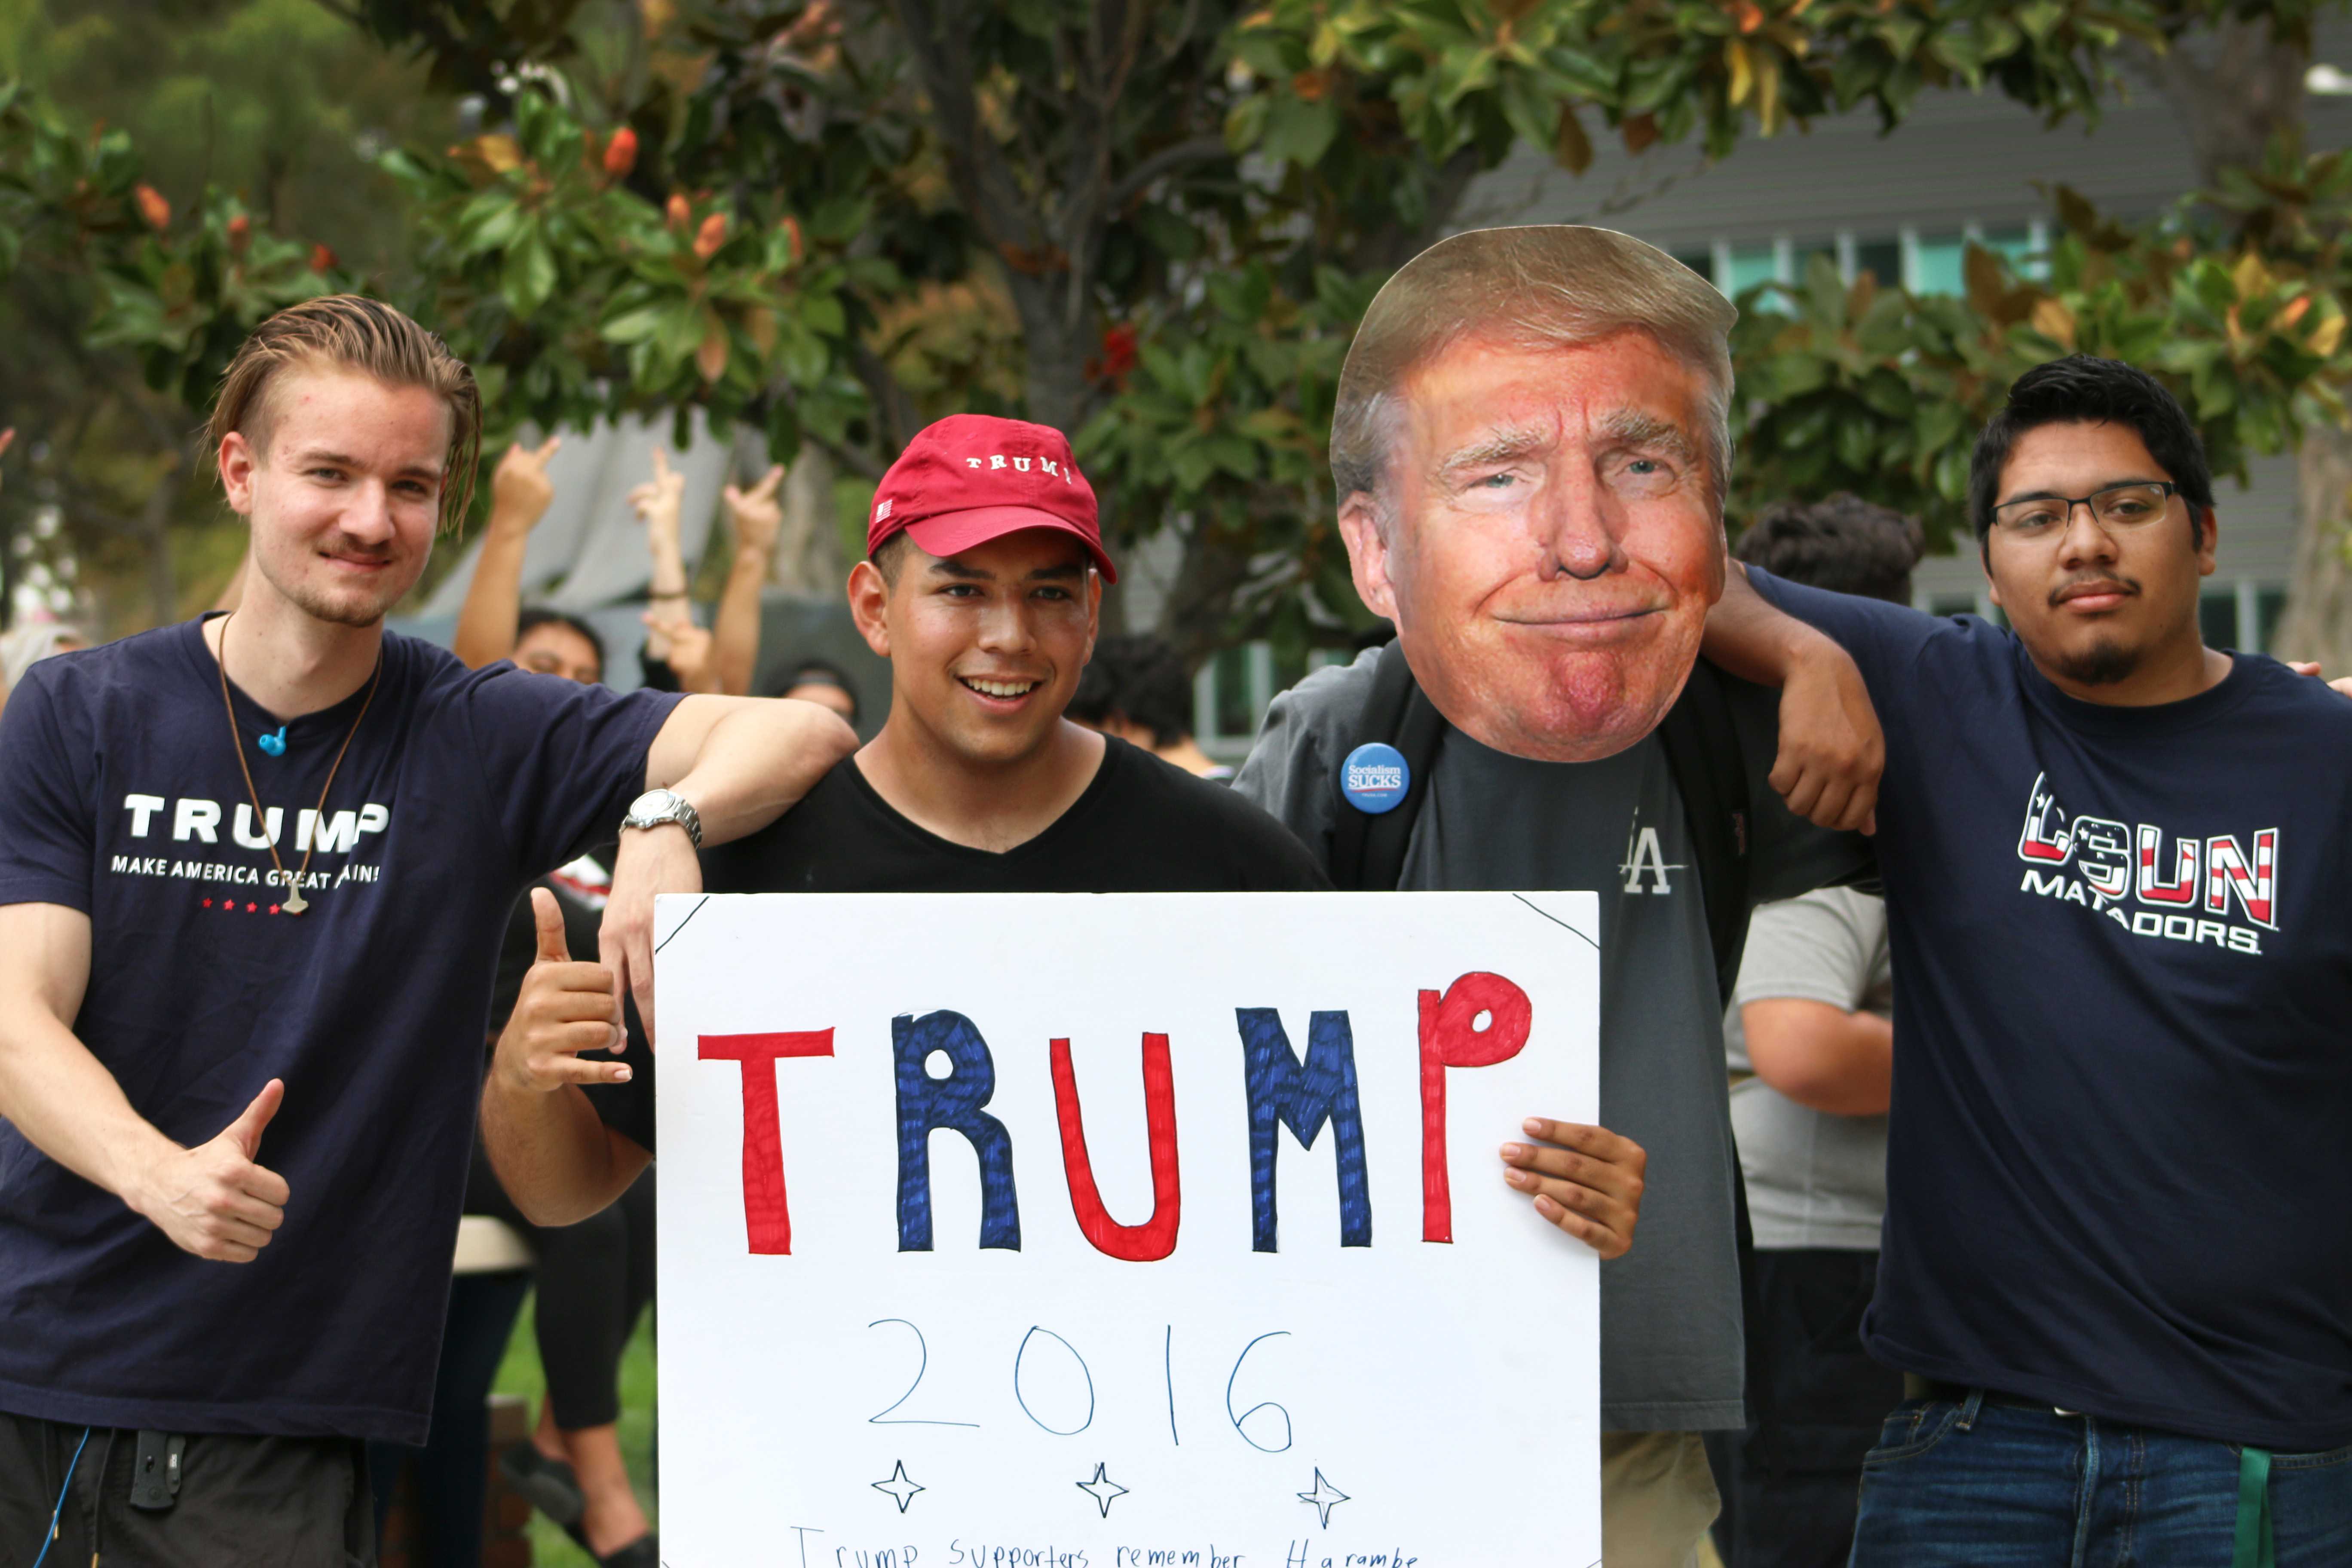 Trump supporters hold up trump 2016 poster while people in the background flip them off